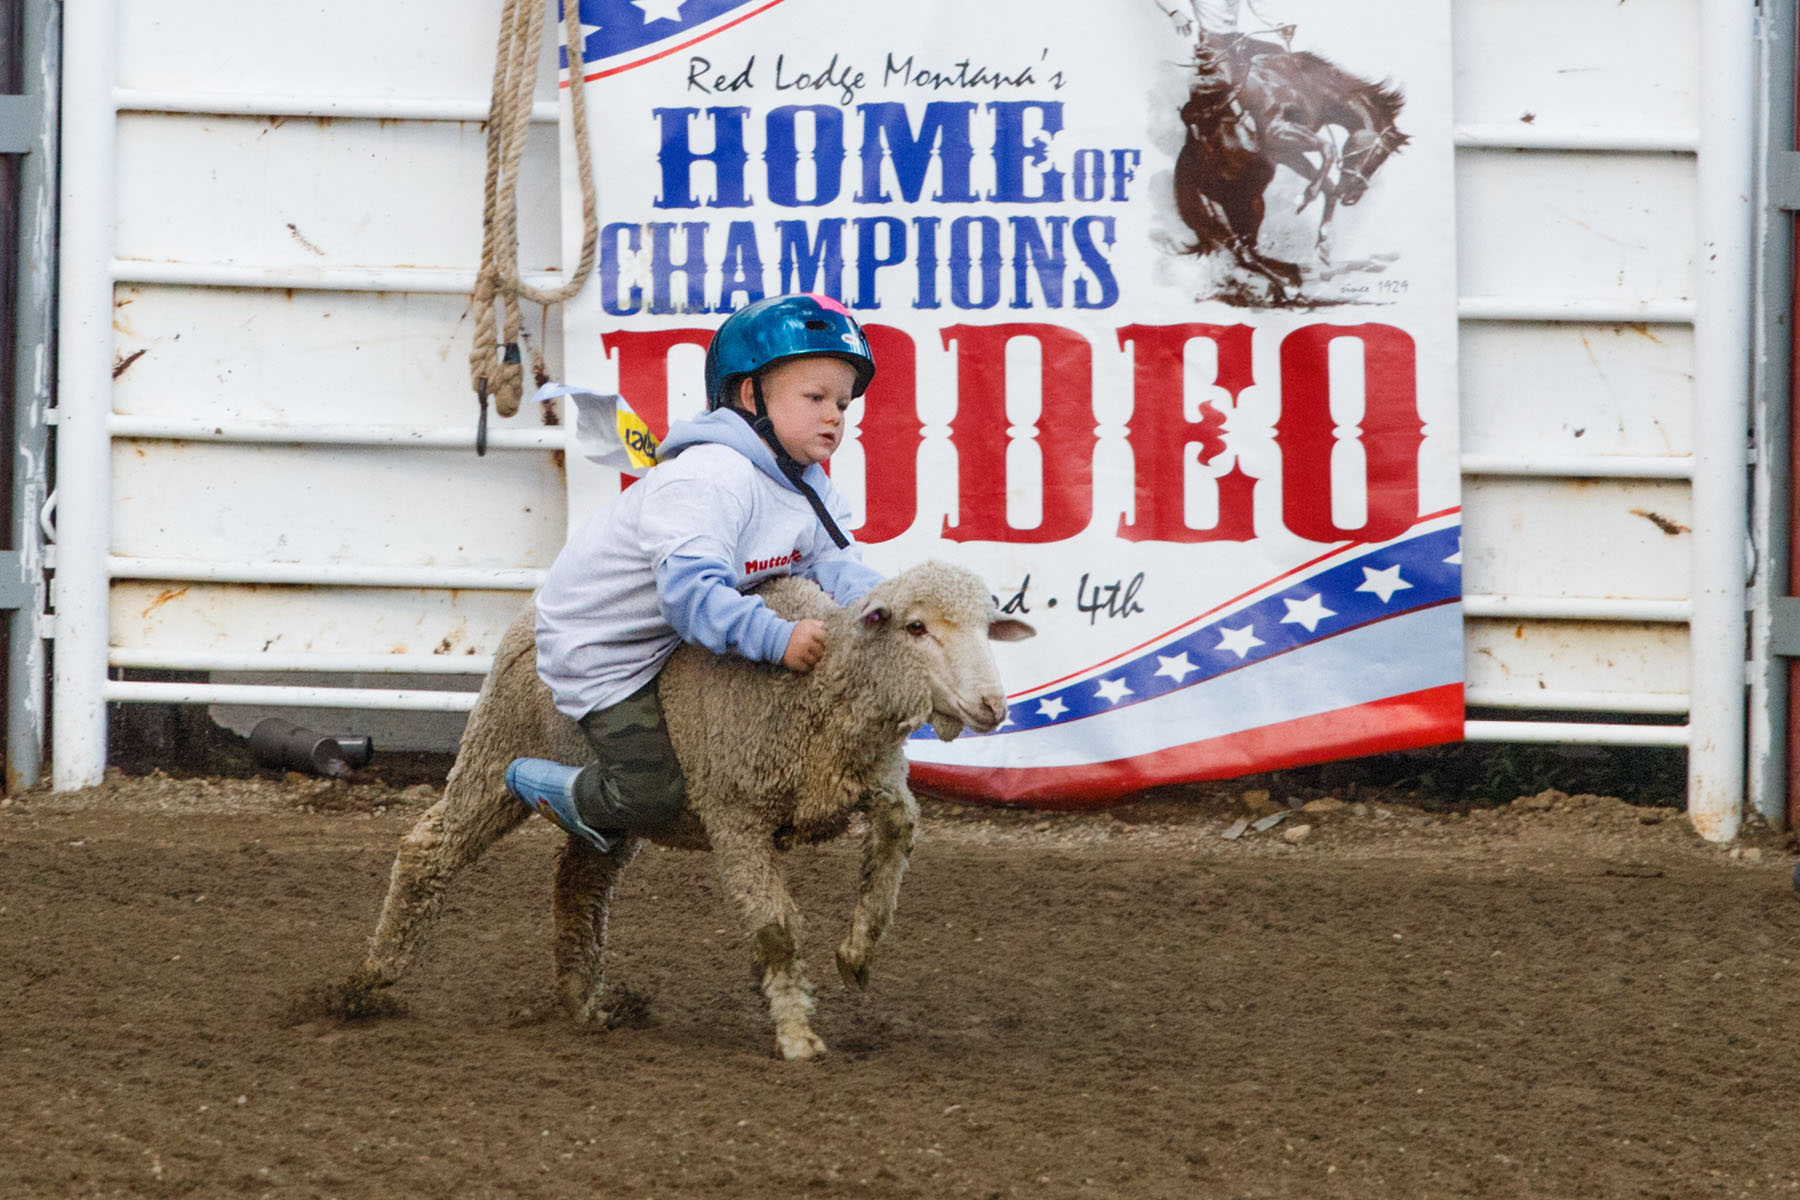 Mutton Busting, Home of Champions Rodeo, Red Lodge, MT.  Click for next photo.